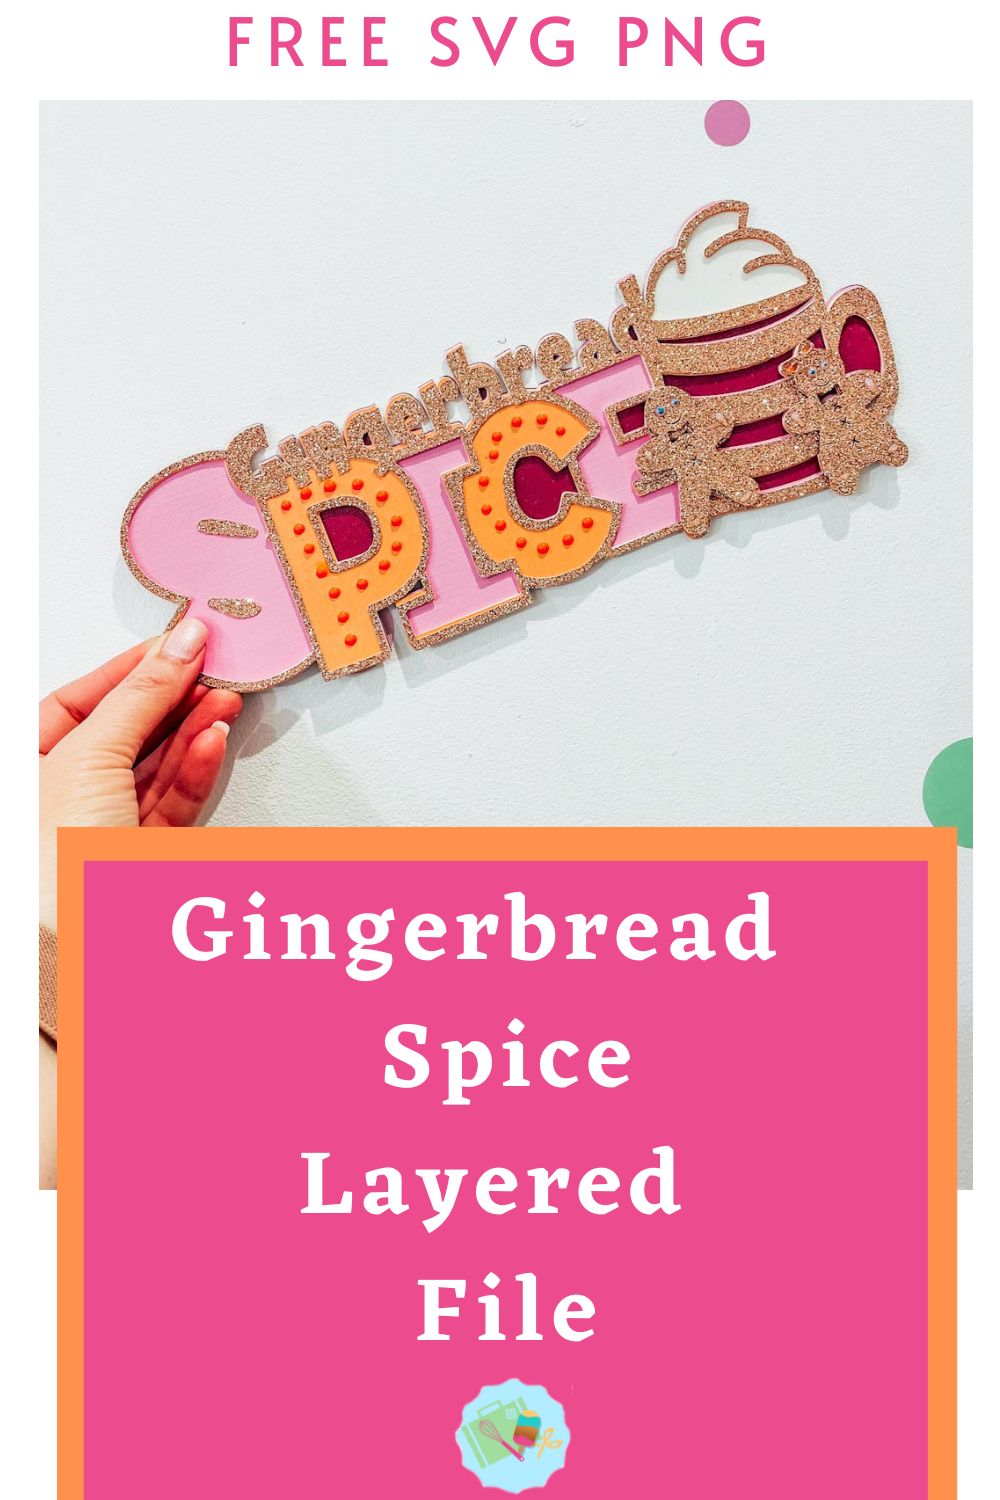 Free Gingerbread Spice SVG, PNG for Cricut, Glowforge and Silhouette